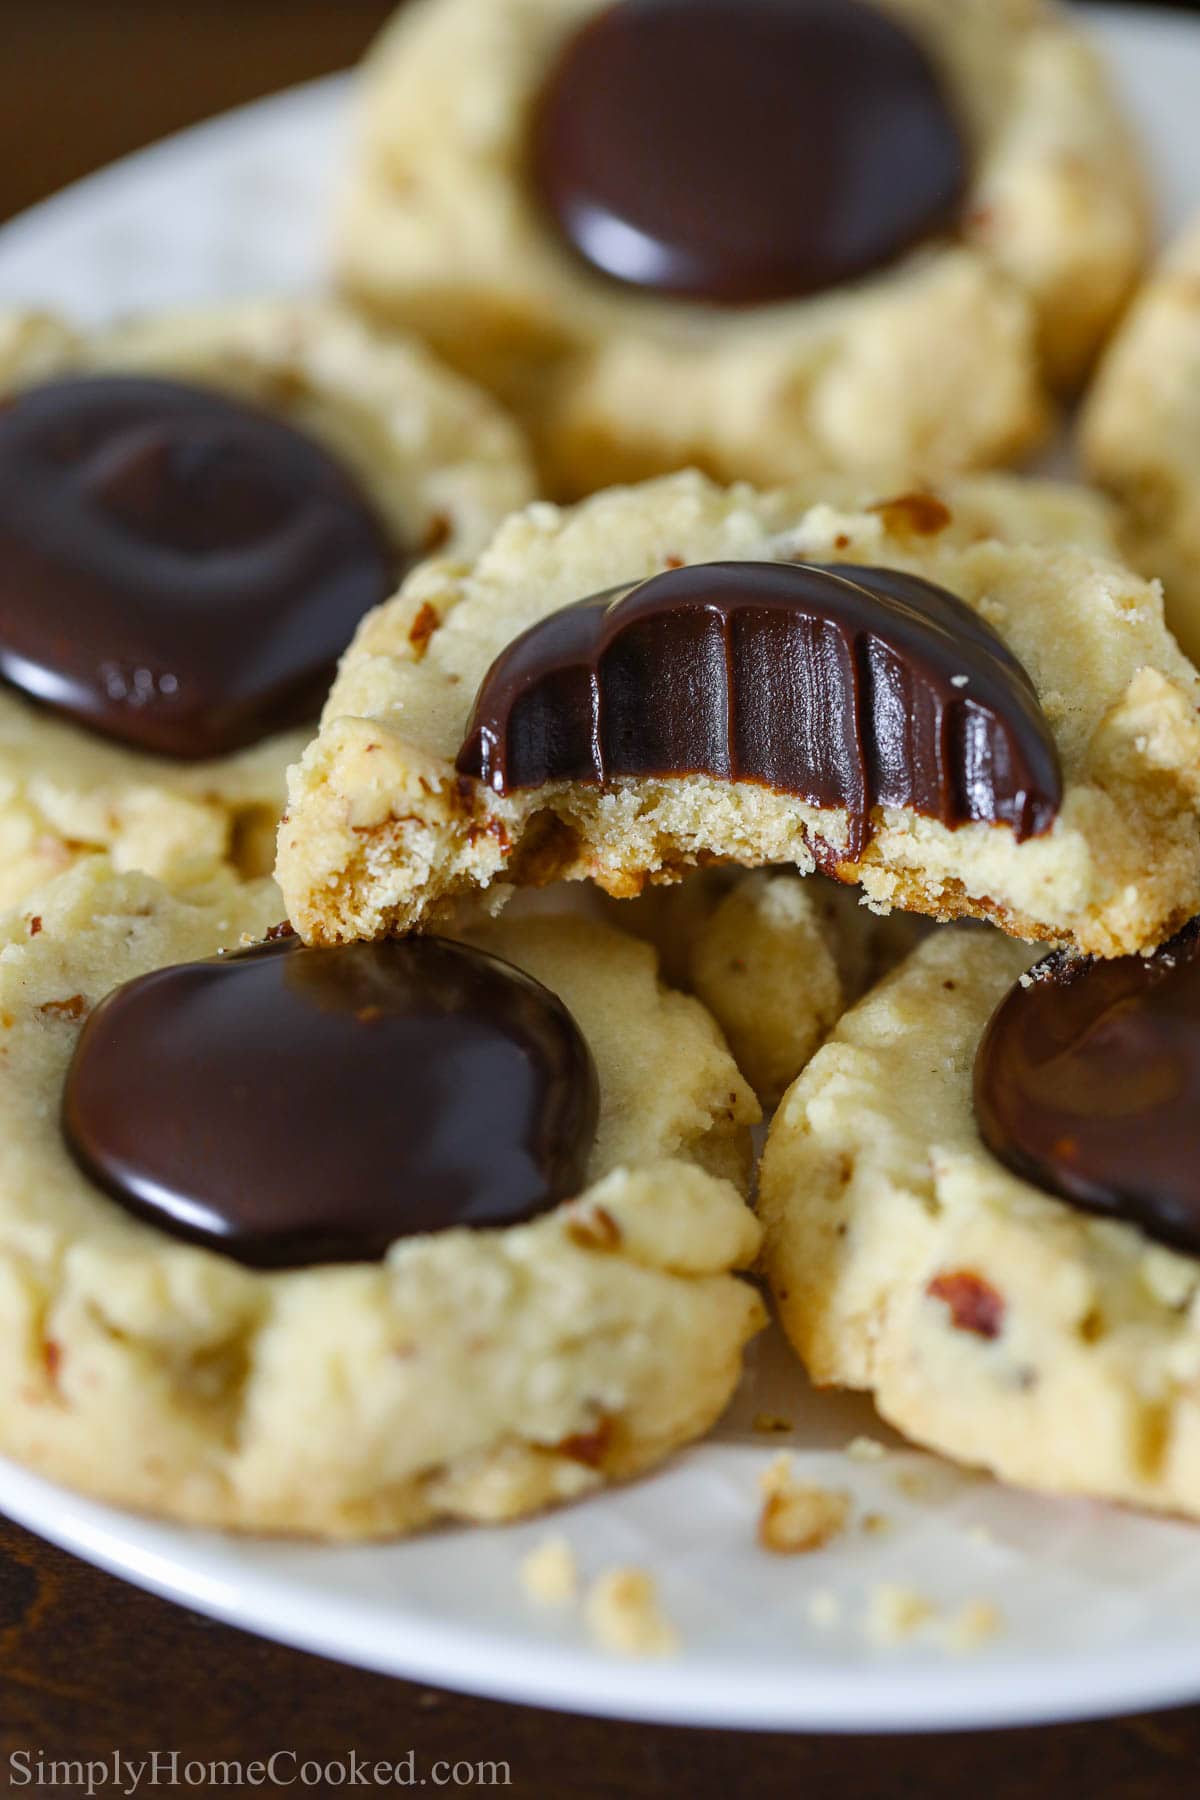 Vertical image of Chocolate Thumbprint Cookies stacked, and a close up on one missing a bite